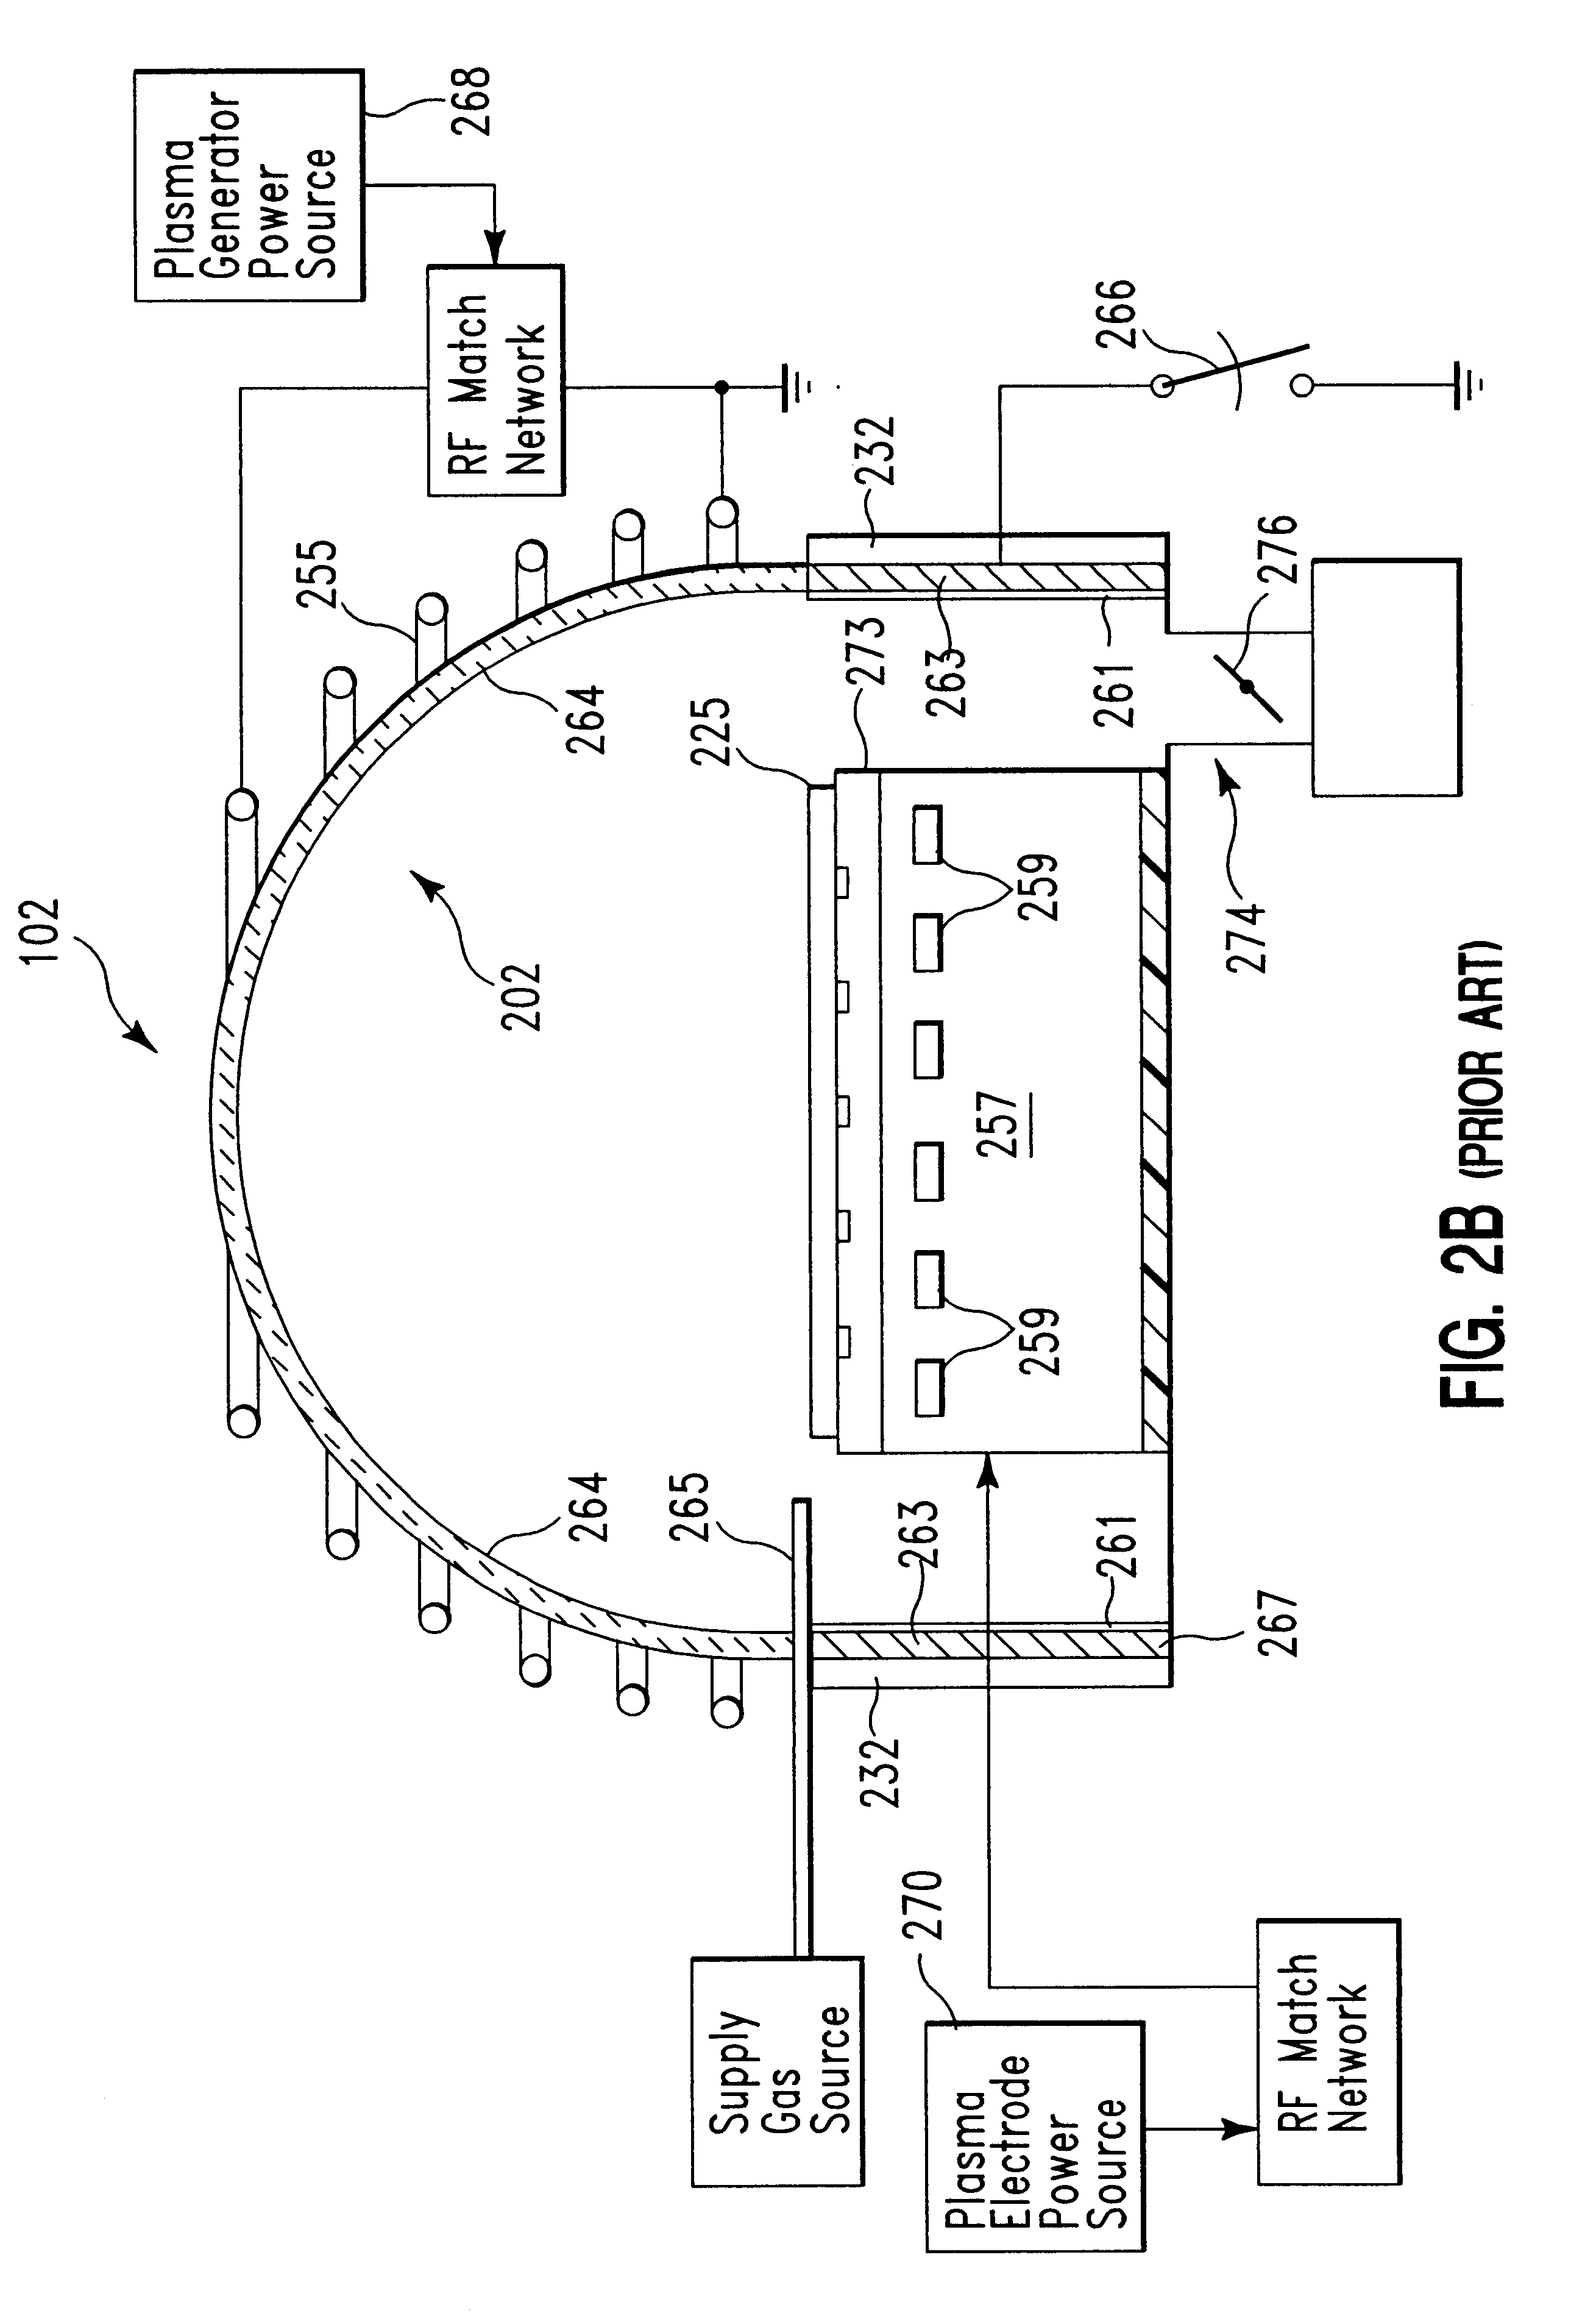 Method of cleaning a semiconductor device processing chamber after a copper etch process